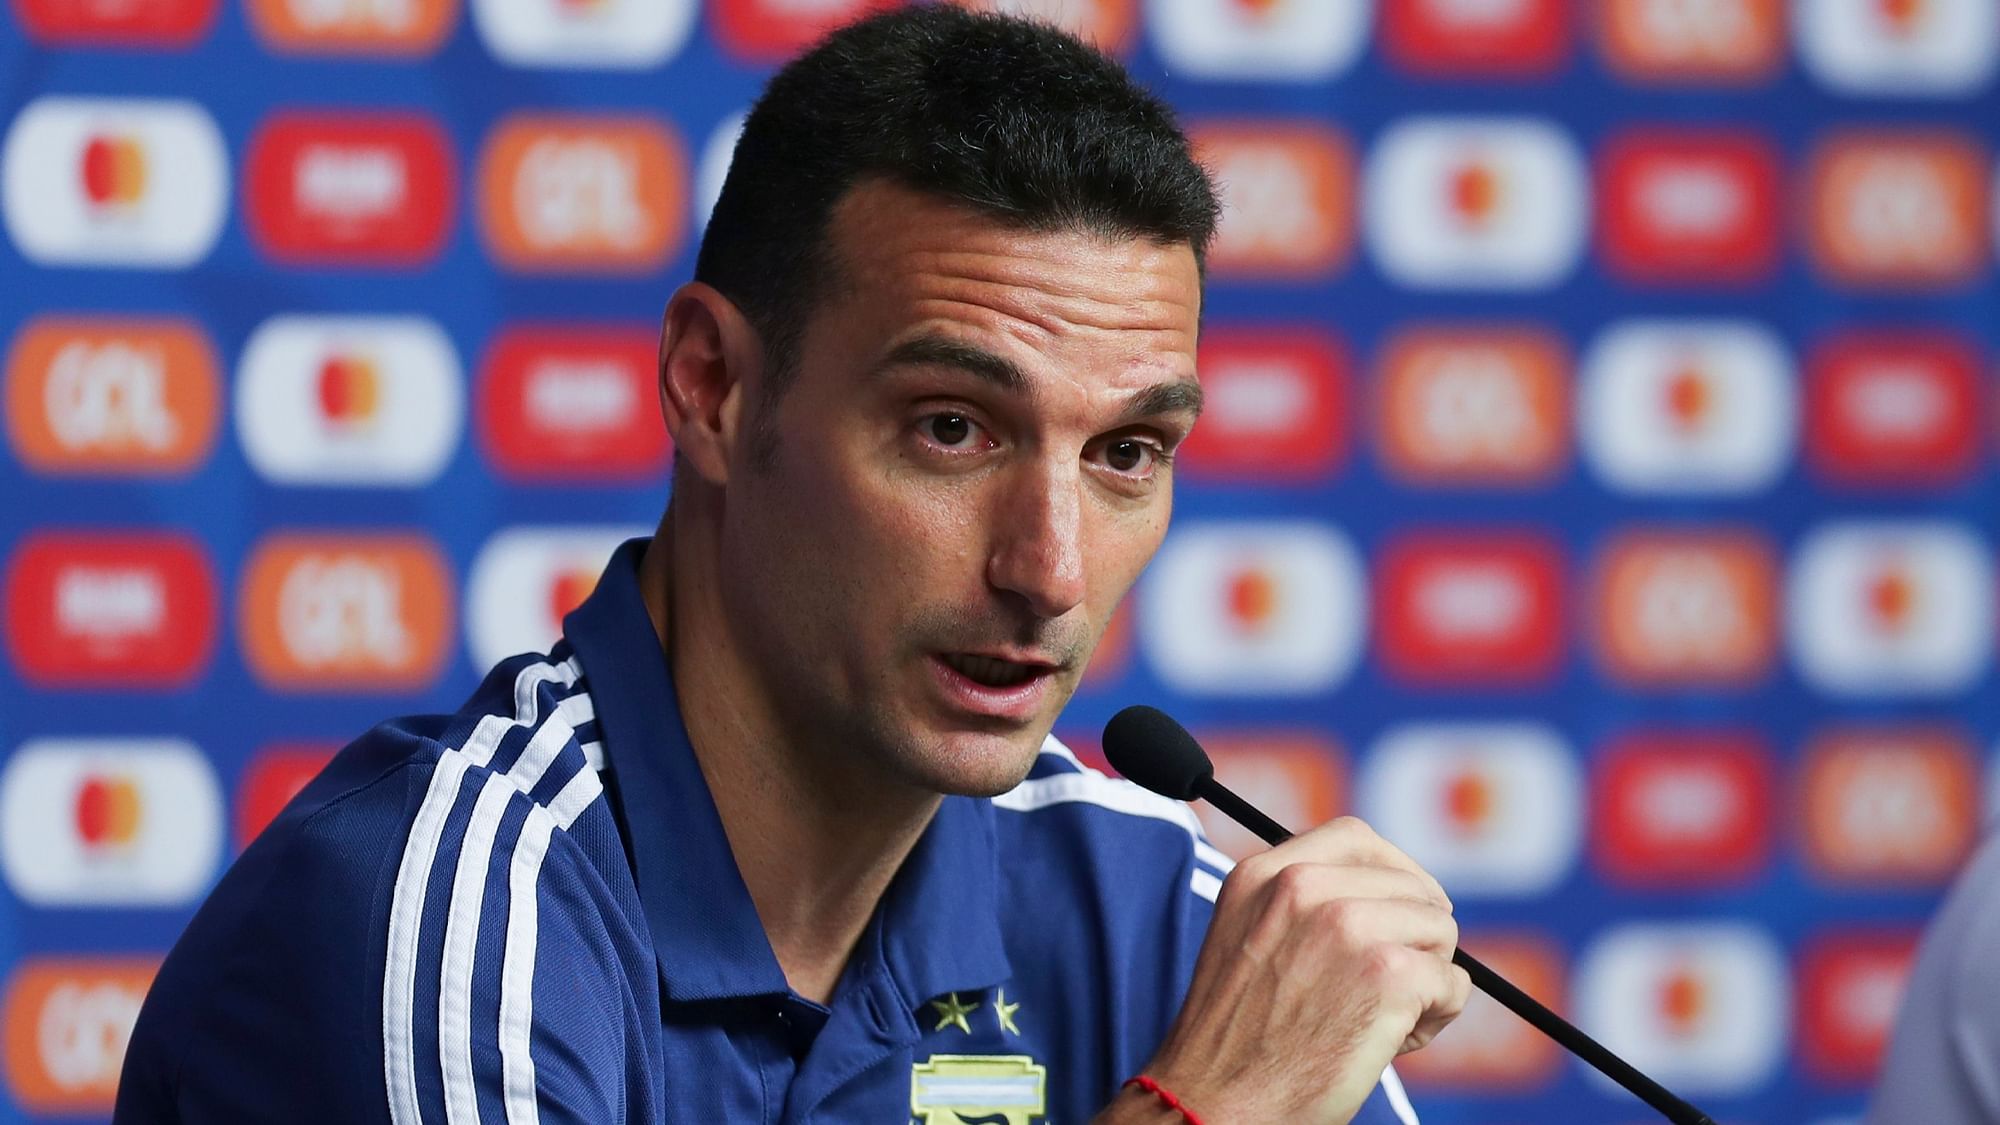 Argentina’s coach Lionel Scaloni looks on during press conference in Belo Horizonte, Brazil, Monday, 1 July 2019.